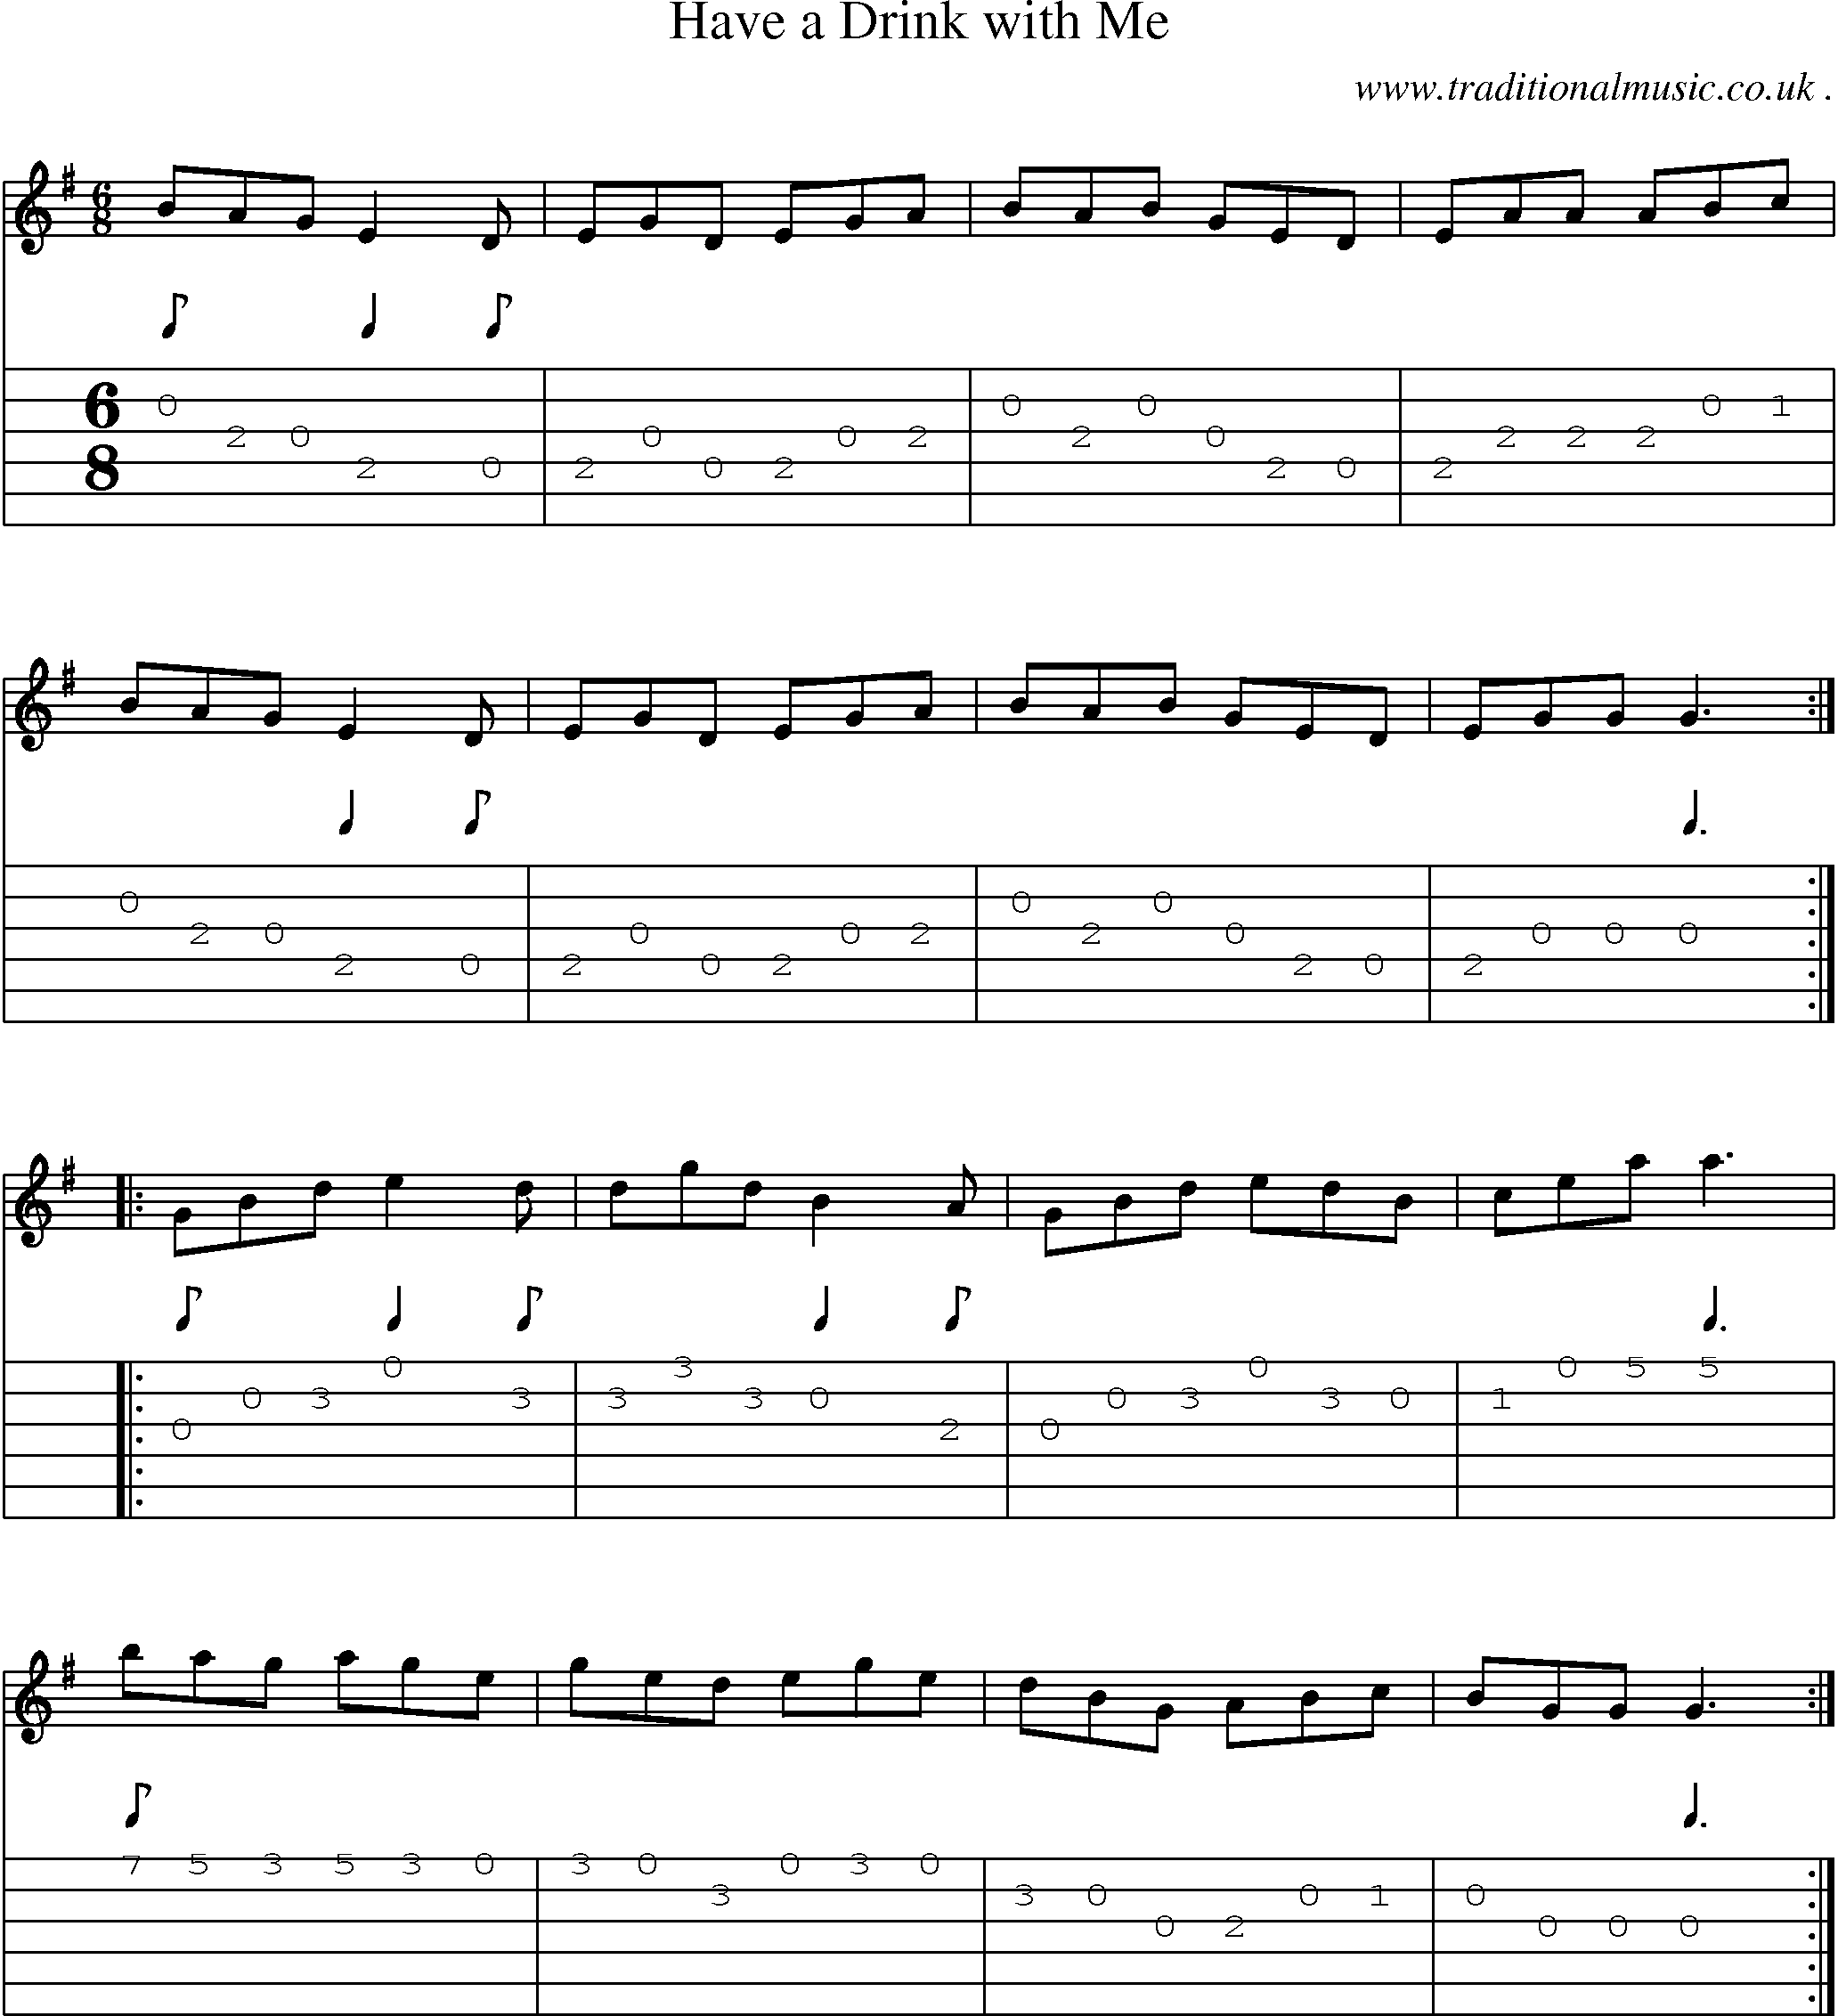 Sheet-Music and Guitar Tabs for Have A Drink With Me